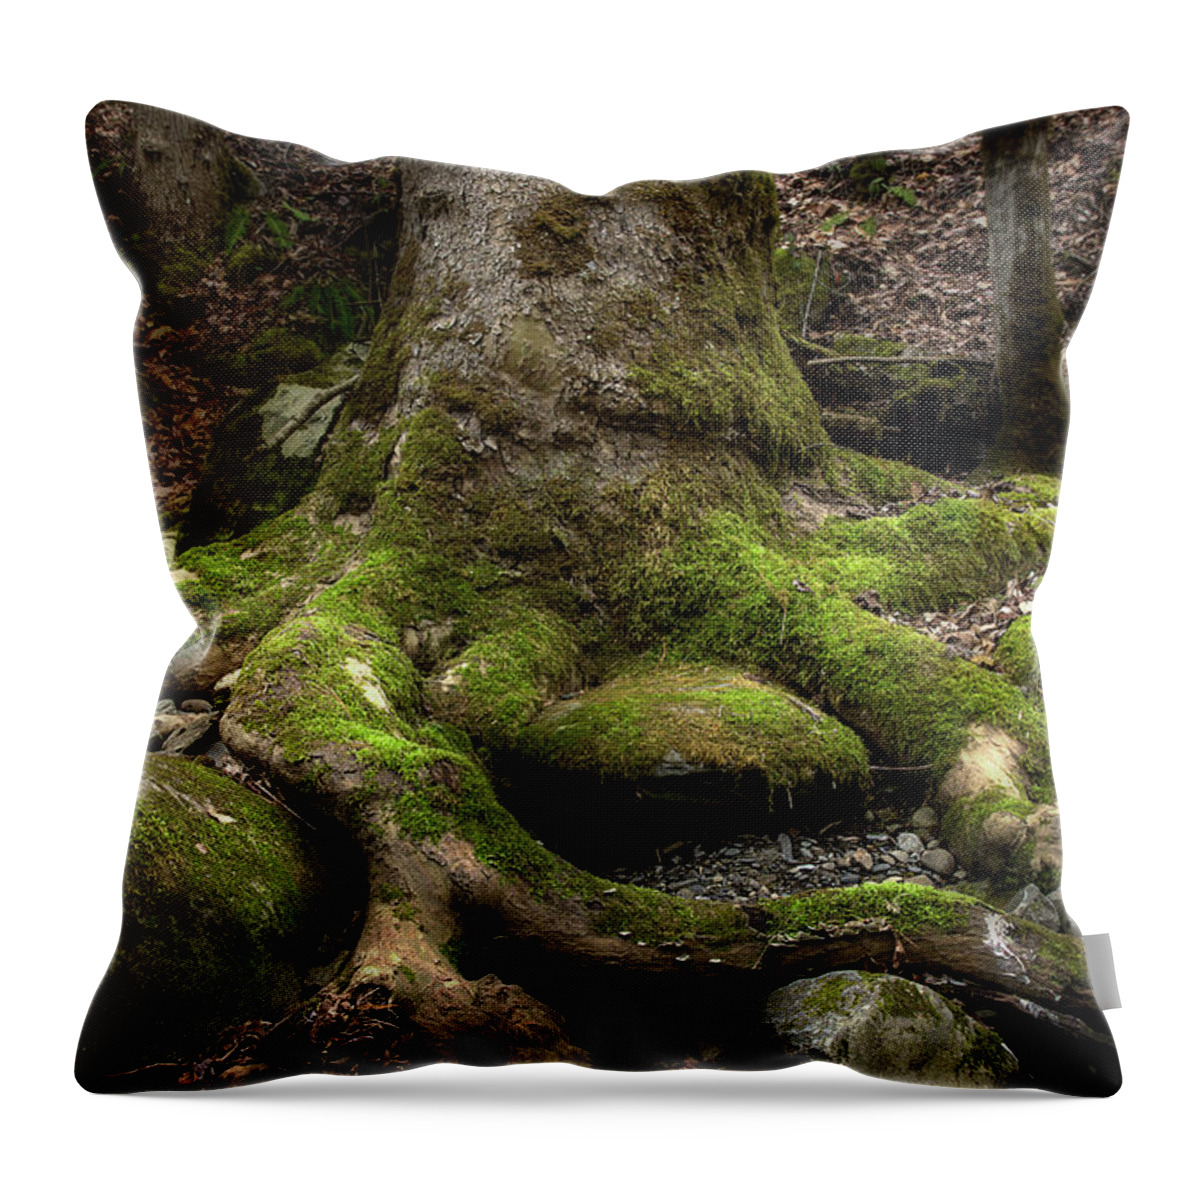 Roots Throw Pillow featuring the photograph Roots Along The River by Mike Eingle